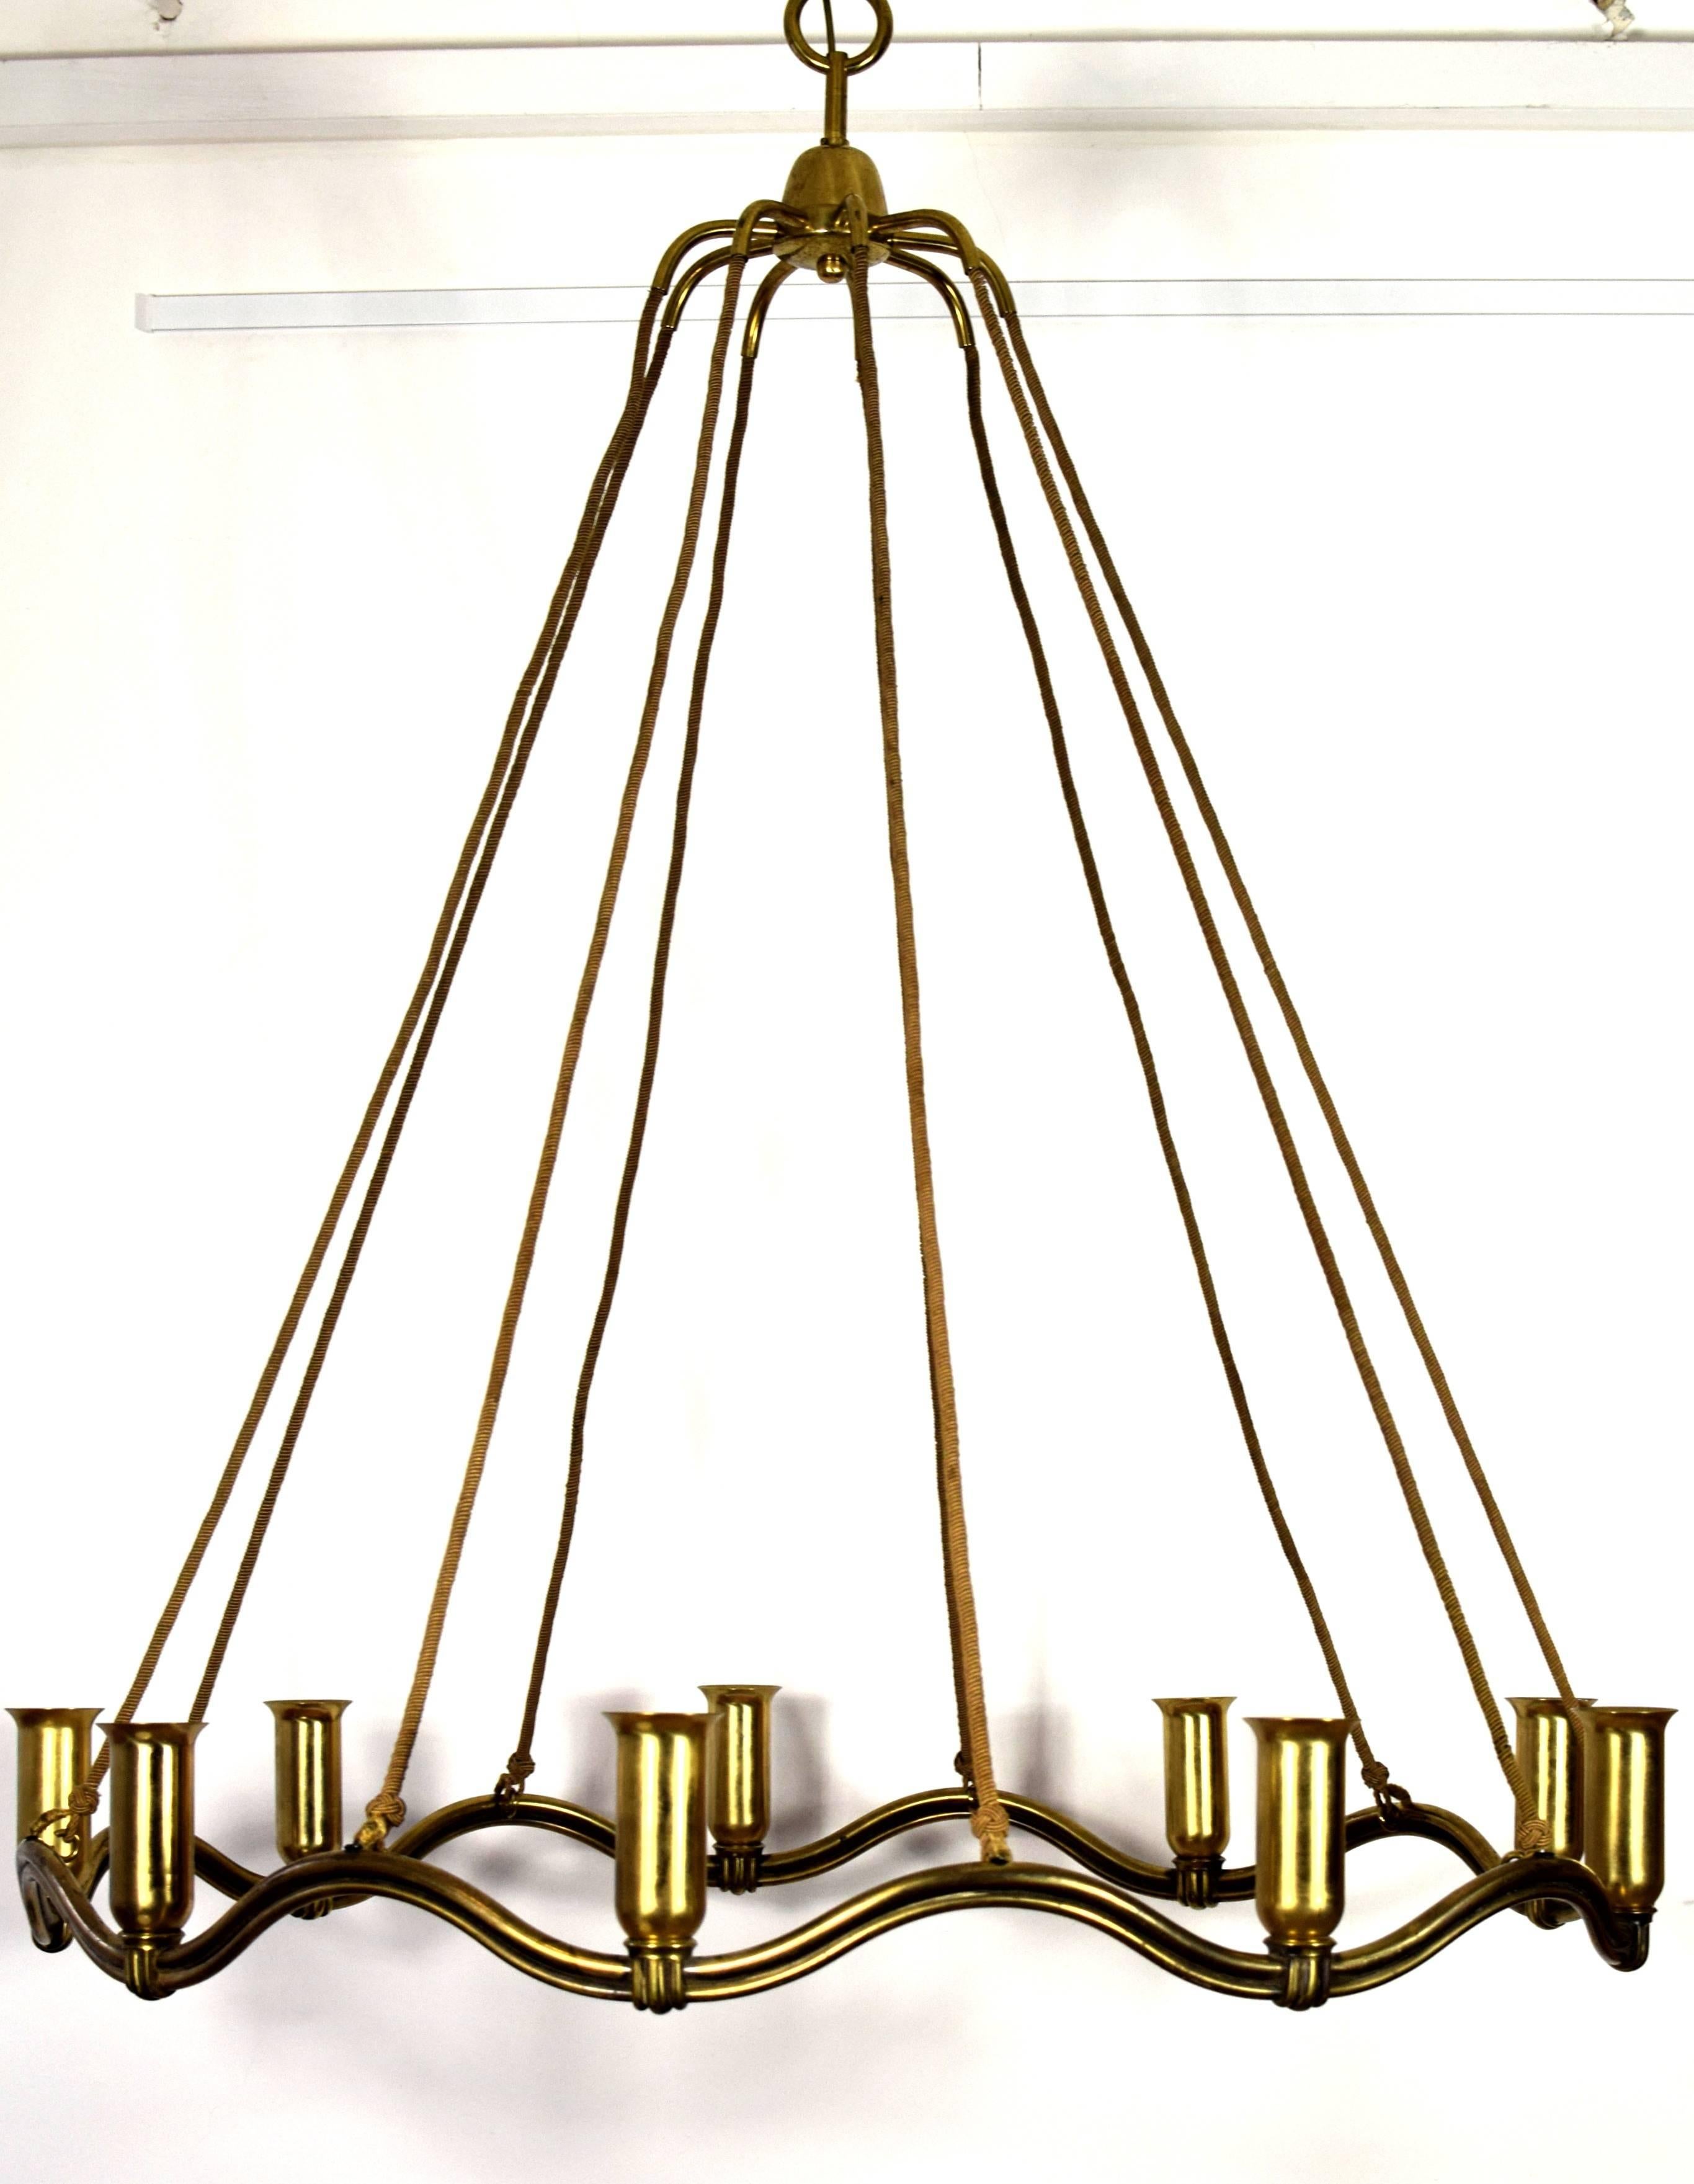 Huge museal wavy ceiling lamp made of solid brass with nine light bulbs
Design and execution of the lamps attributed by Hugo Gorge.
Creation time, circa 1935
Good original condition with nice patina
Fully functional.
According to previous